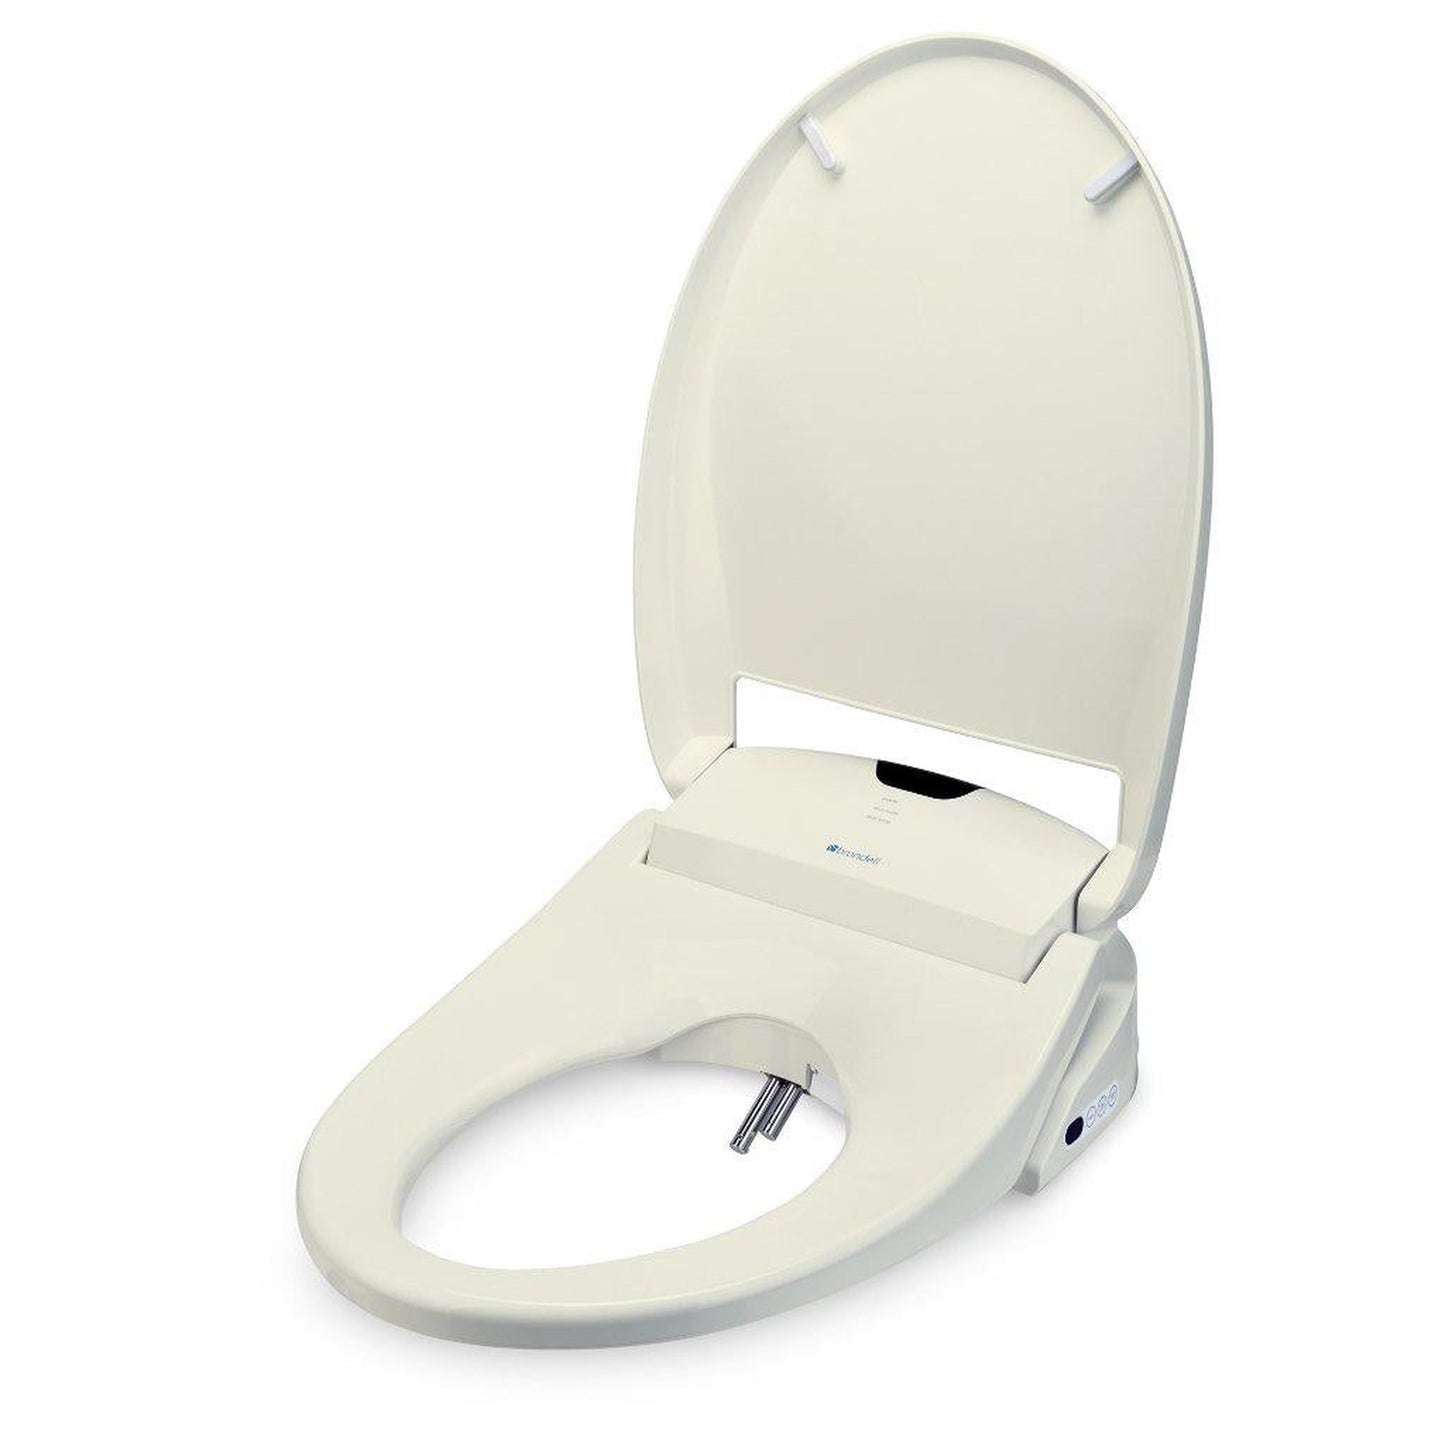 Brondell Swash 1400 20.43" Biscuit Elongated Electric Luxury Bidet Toilet Seat With Wireless Remote Control